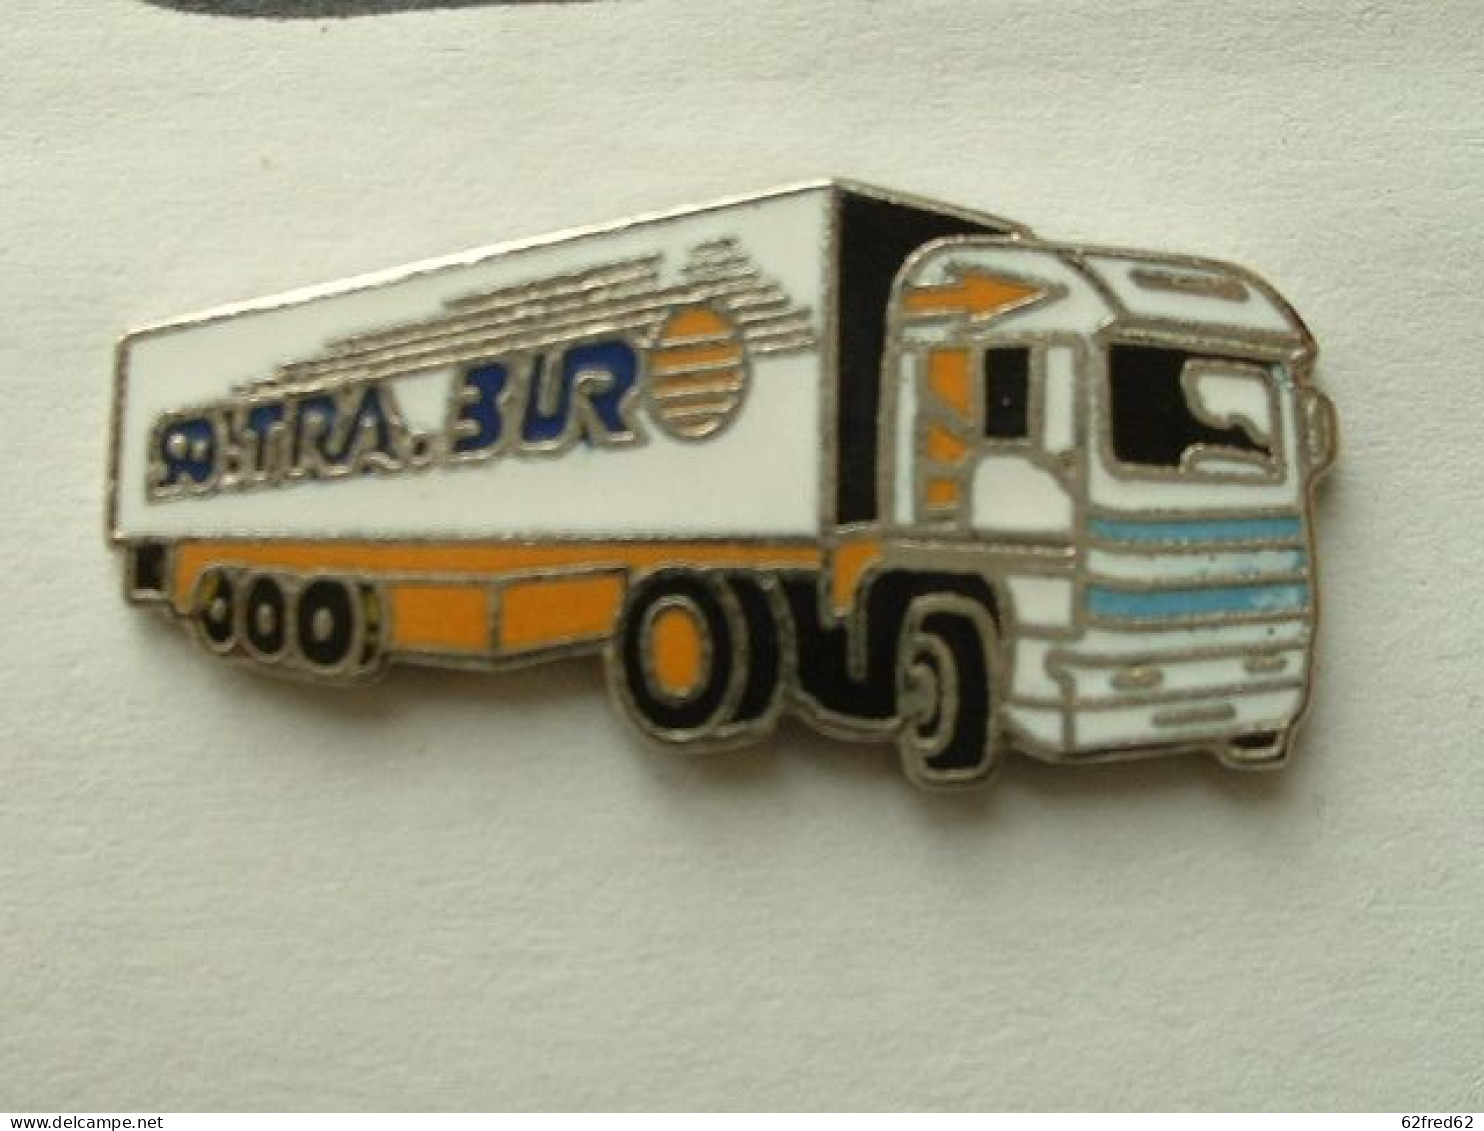 Pin's CAMION  - TRANSPORTS SOSTRA BUR - EMAIL - Transports